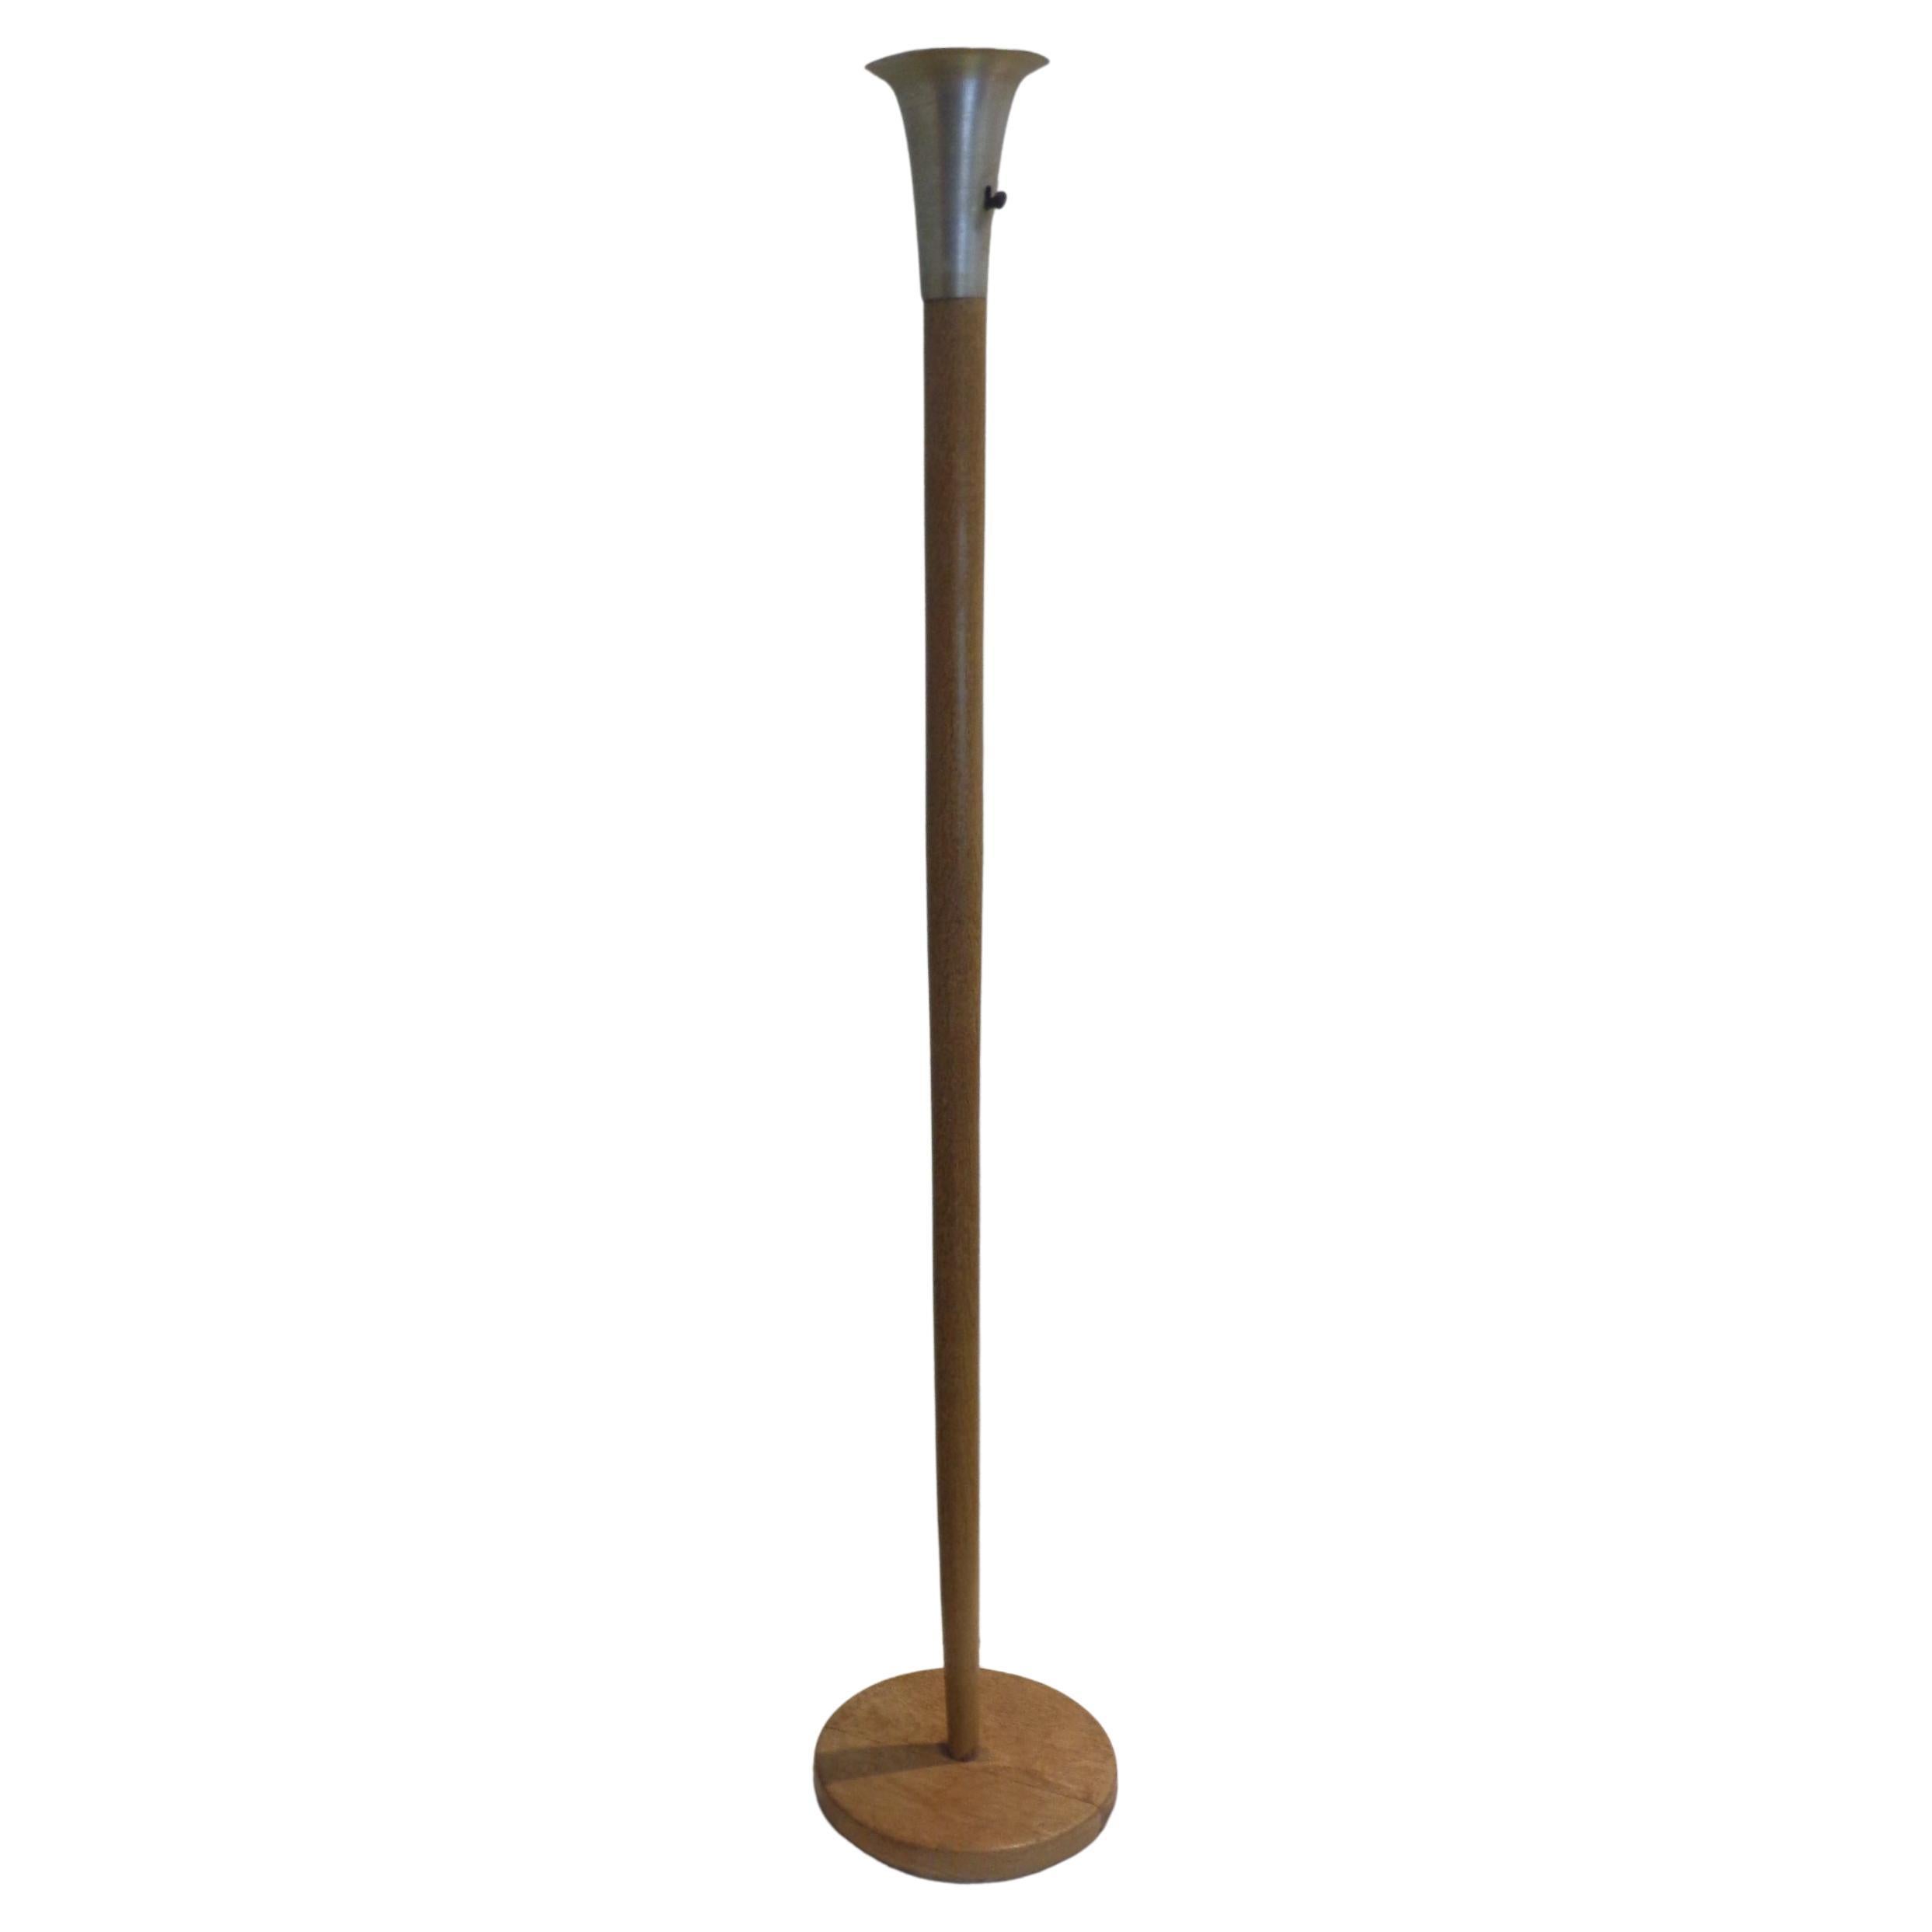  1940's Cerused Oak and Aluminum Torchiere Floor Lamp Style of Russel Wright